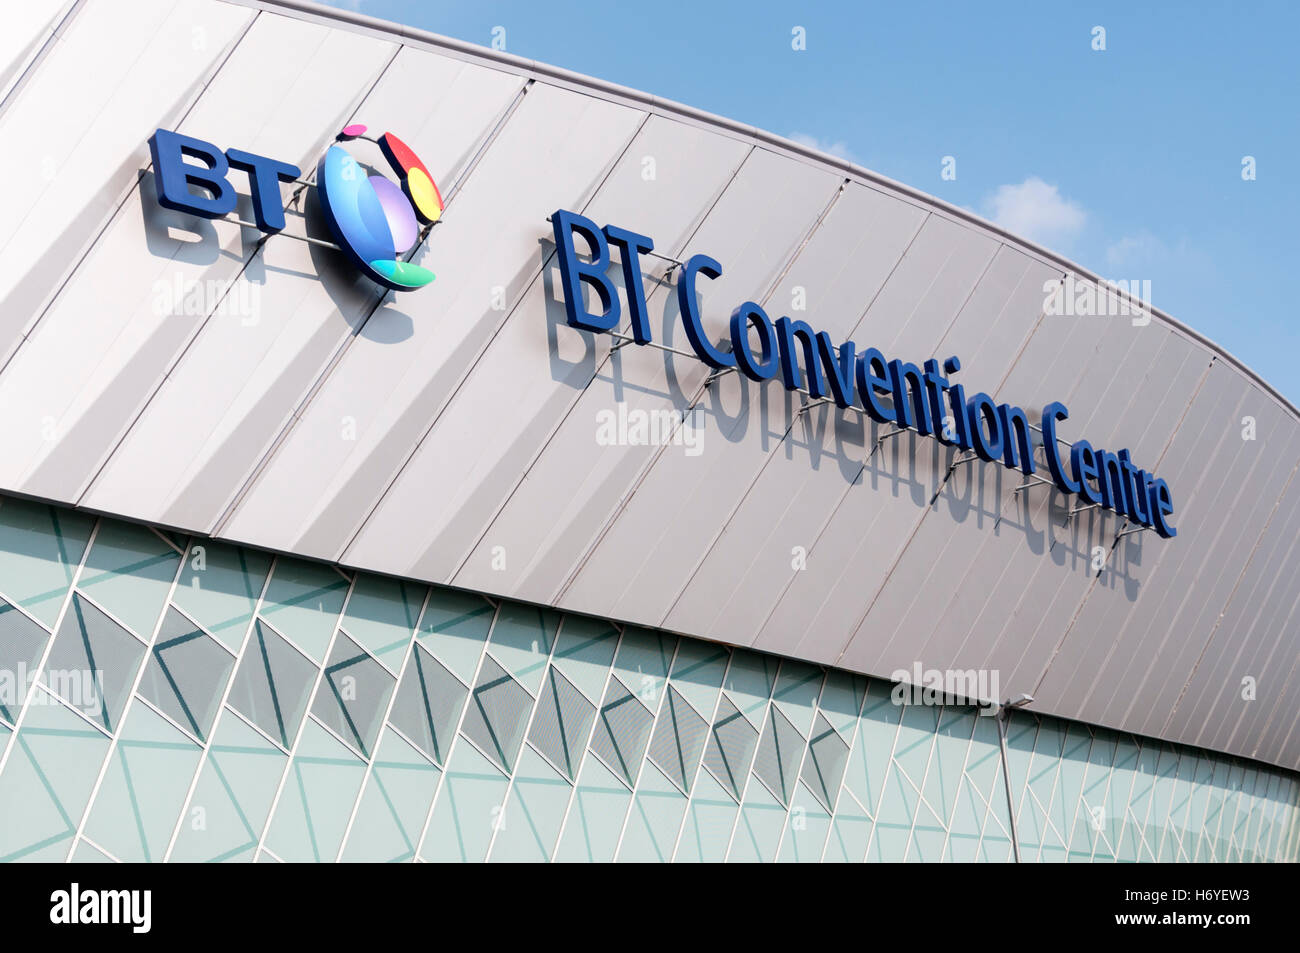 Name and logo on the BT Convention Centre, Liverpool. Stock Photo